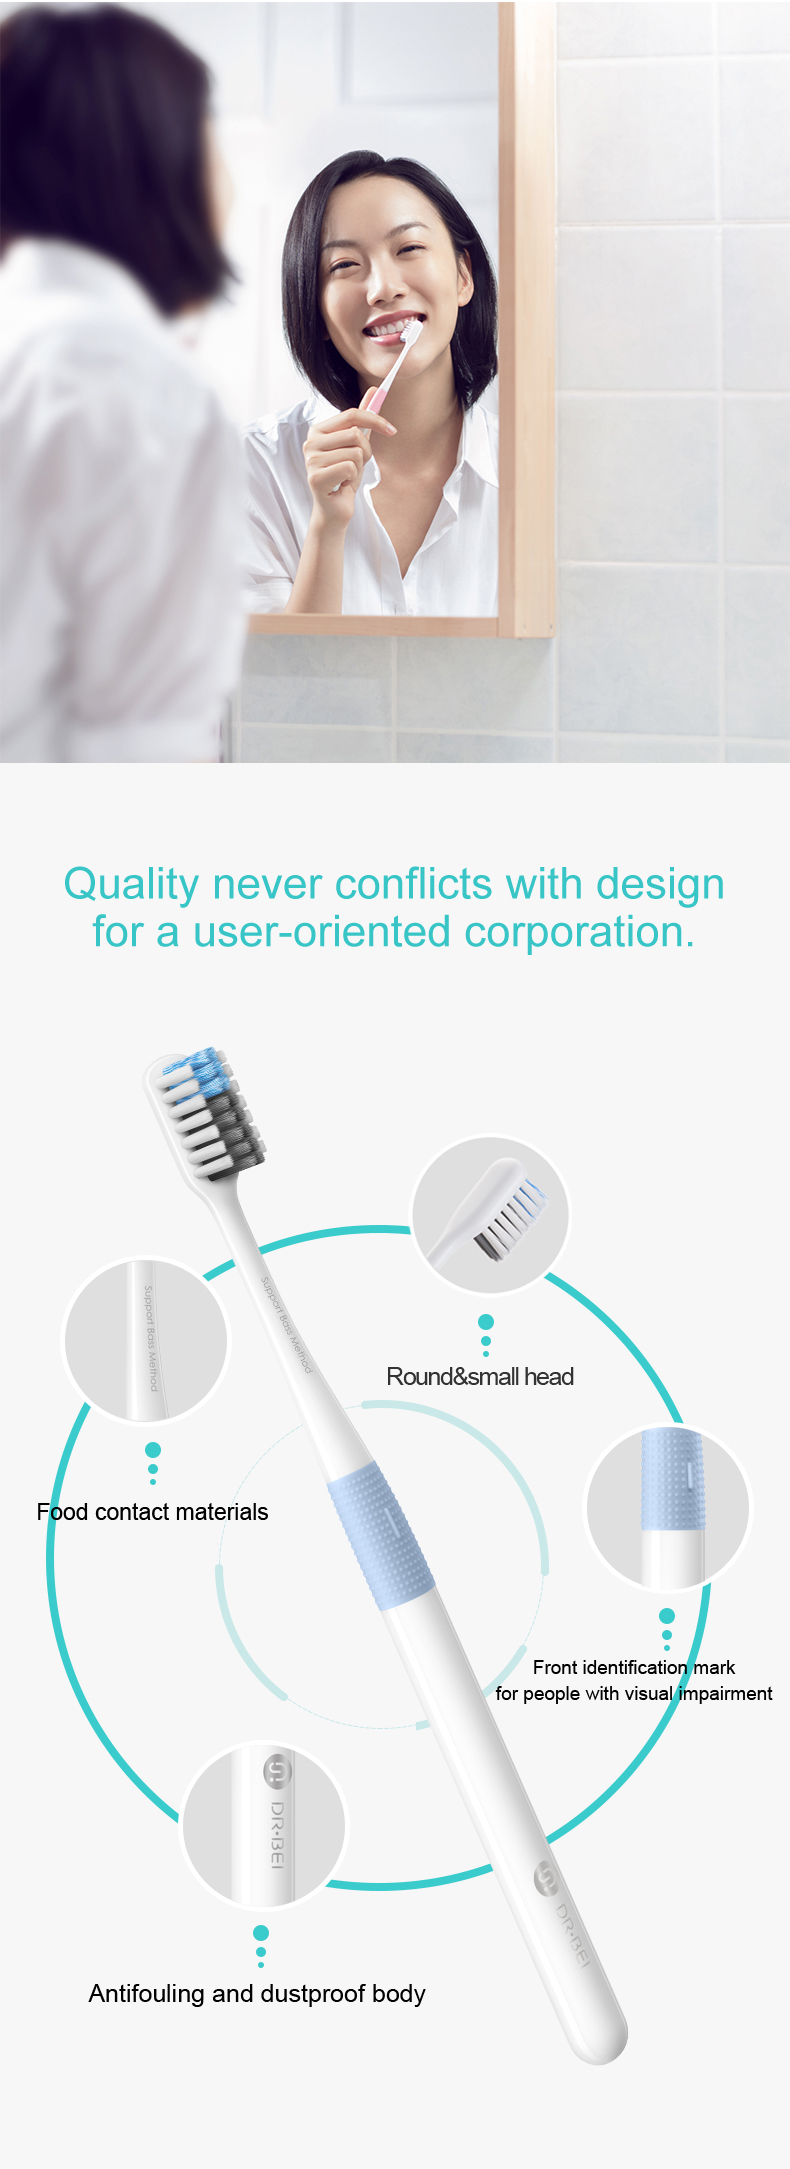 DR.BEI Bass Toothbrush, 4 Pieces (Xiaomi Version) Xiaomi Youpin DR.BEI Xiaomi Tooth Mi Bass Method Sandwish-bedded Better Brush Wire 4Colors Deep Cleaning Toothbrush